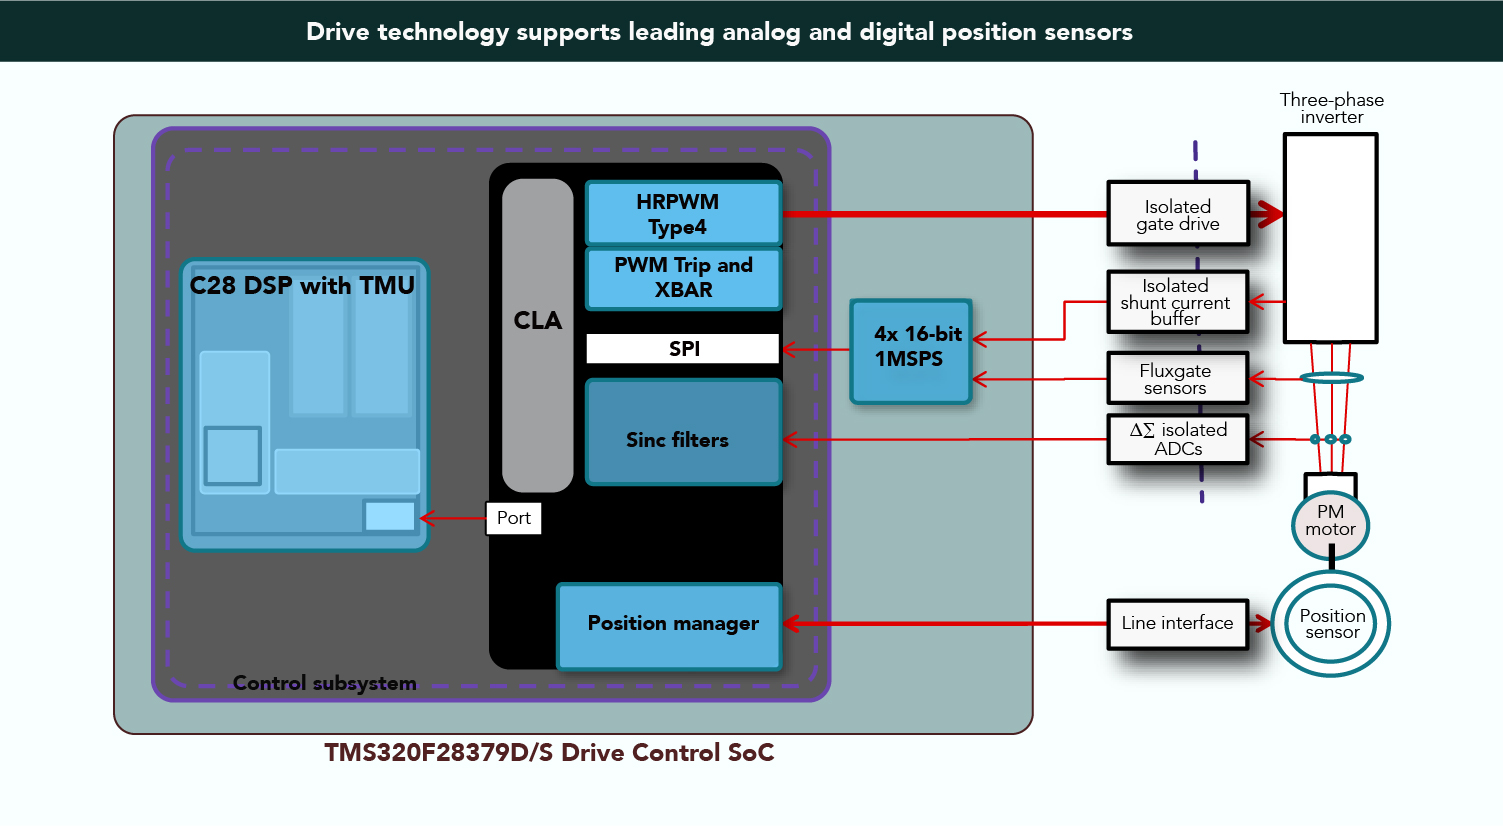 New MCUs and software such as TI’s DesignDRIVE Position Manager support leading analog and digital position sensors. Try out DesignDRIVE and industrial drive-design topologies with TI’s Kits TMDXIDDK379D or TMDXIDDK379D-MTR-BNDL available through store.ti.com and authorized TI distributors. DesignDRIVE Position Manager technology helps designers get industrial inverter or servo-drive products to market quickly.